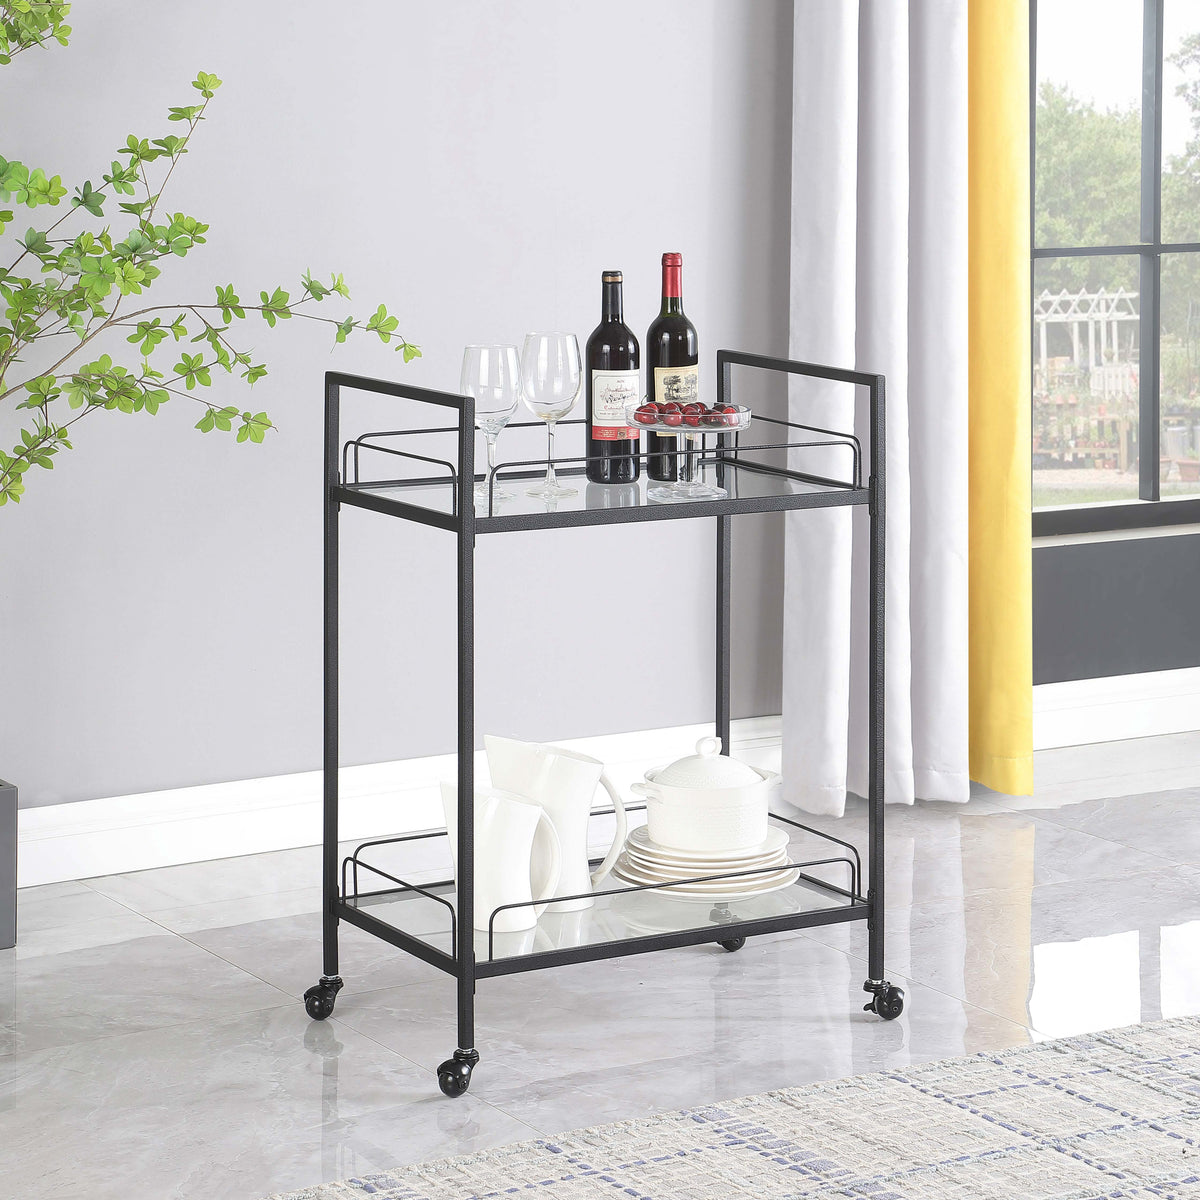 Curltis Serving Cart with Glass Shelves Clear and Black  Las Vegas Furniture Stores